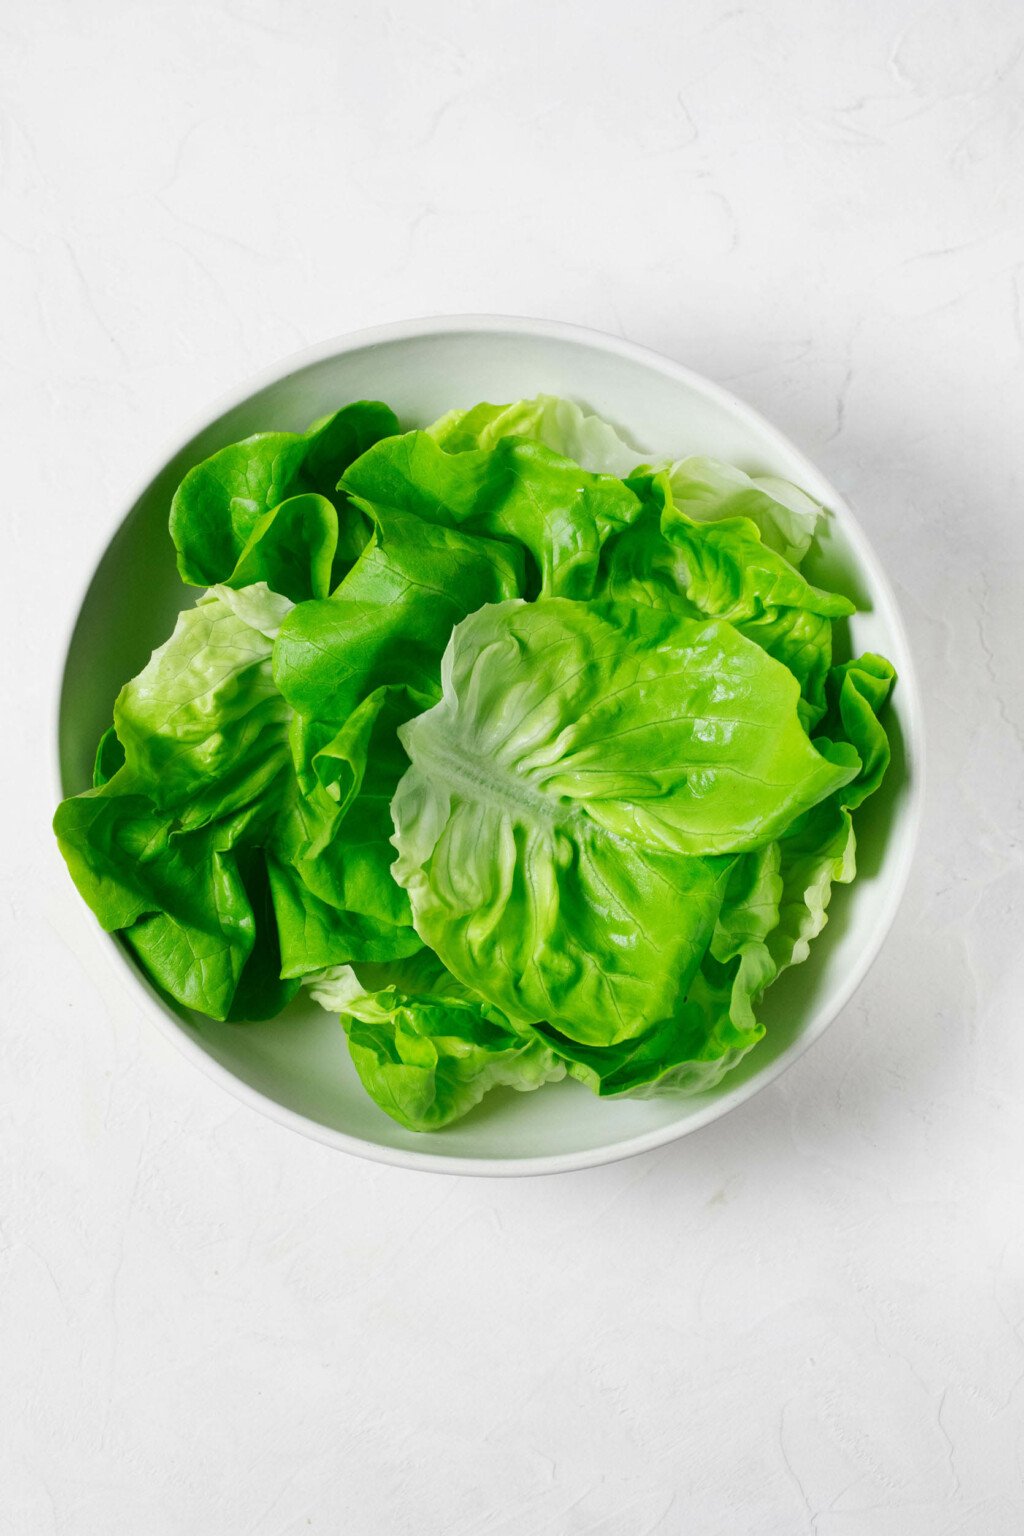 An overhead image of a white bowl, which is filled with bright green butter lettuce leaves.